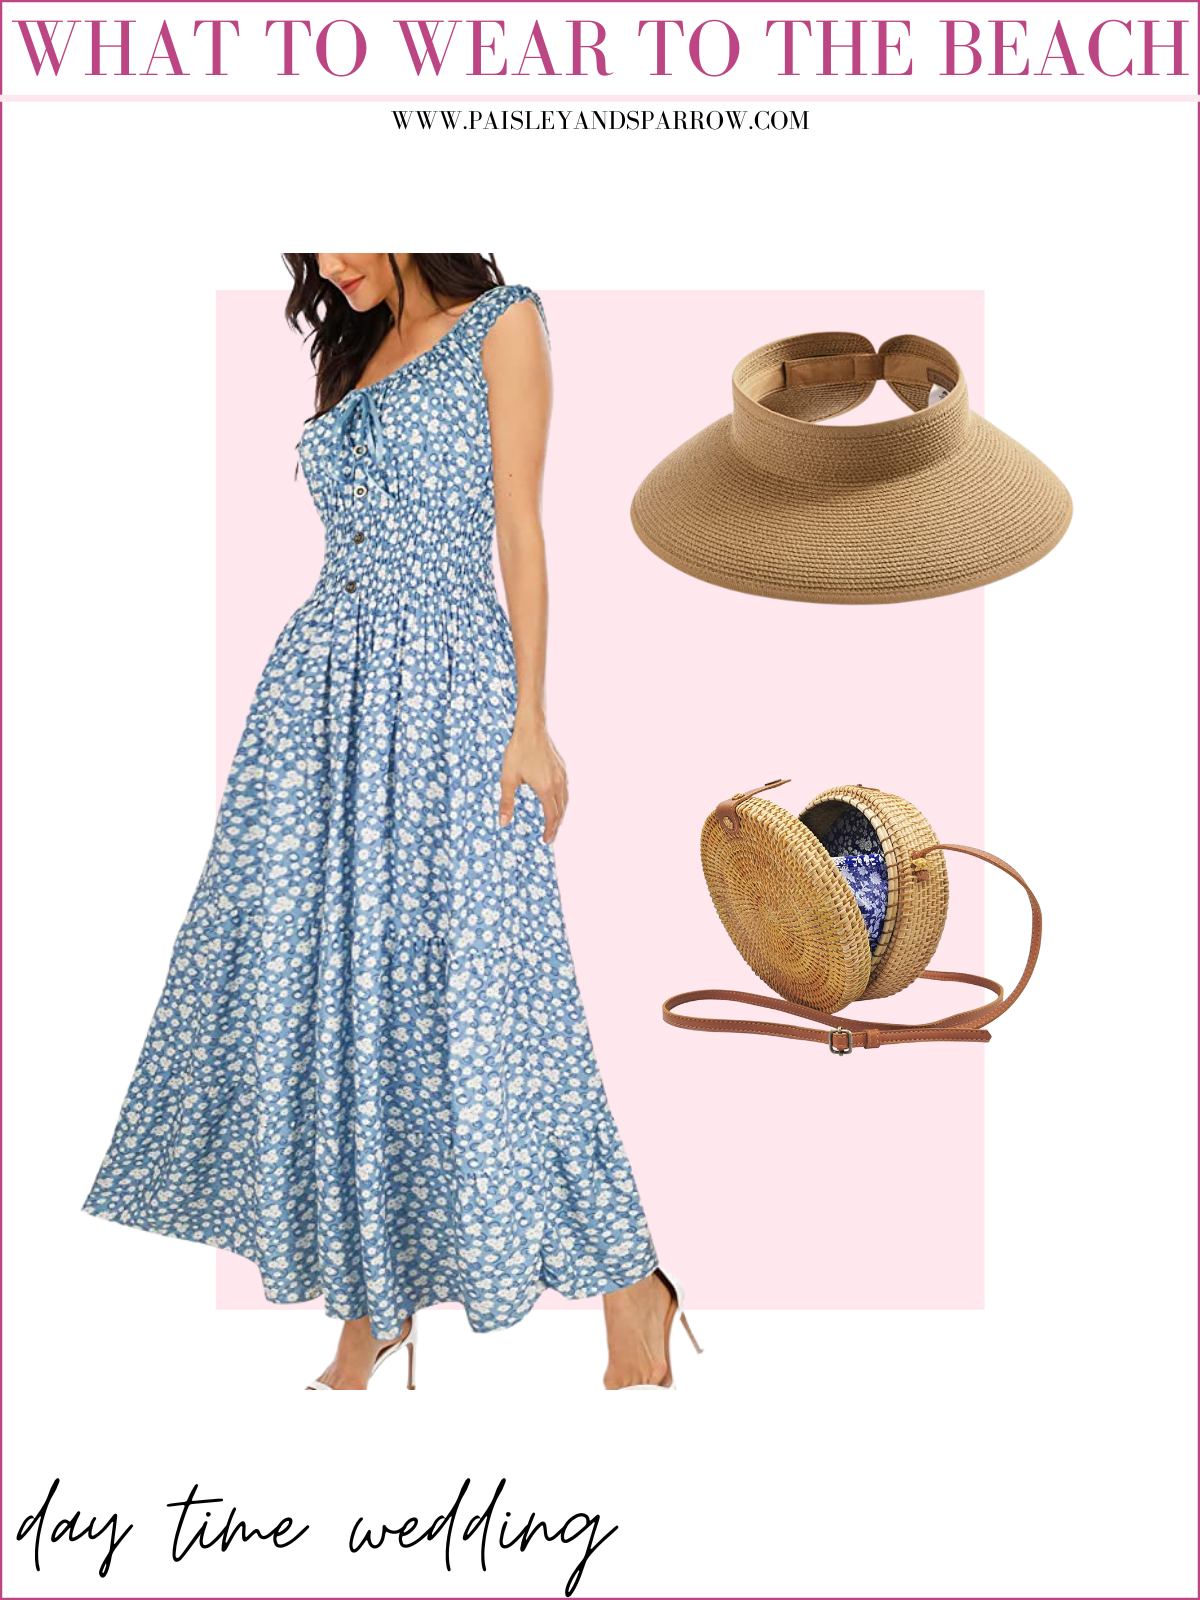 what to wear to the beach daytime wedding - blue maxi dress, visor and rattan bag